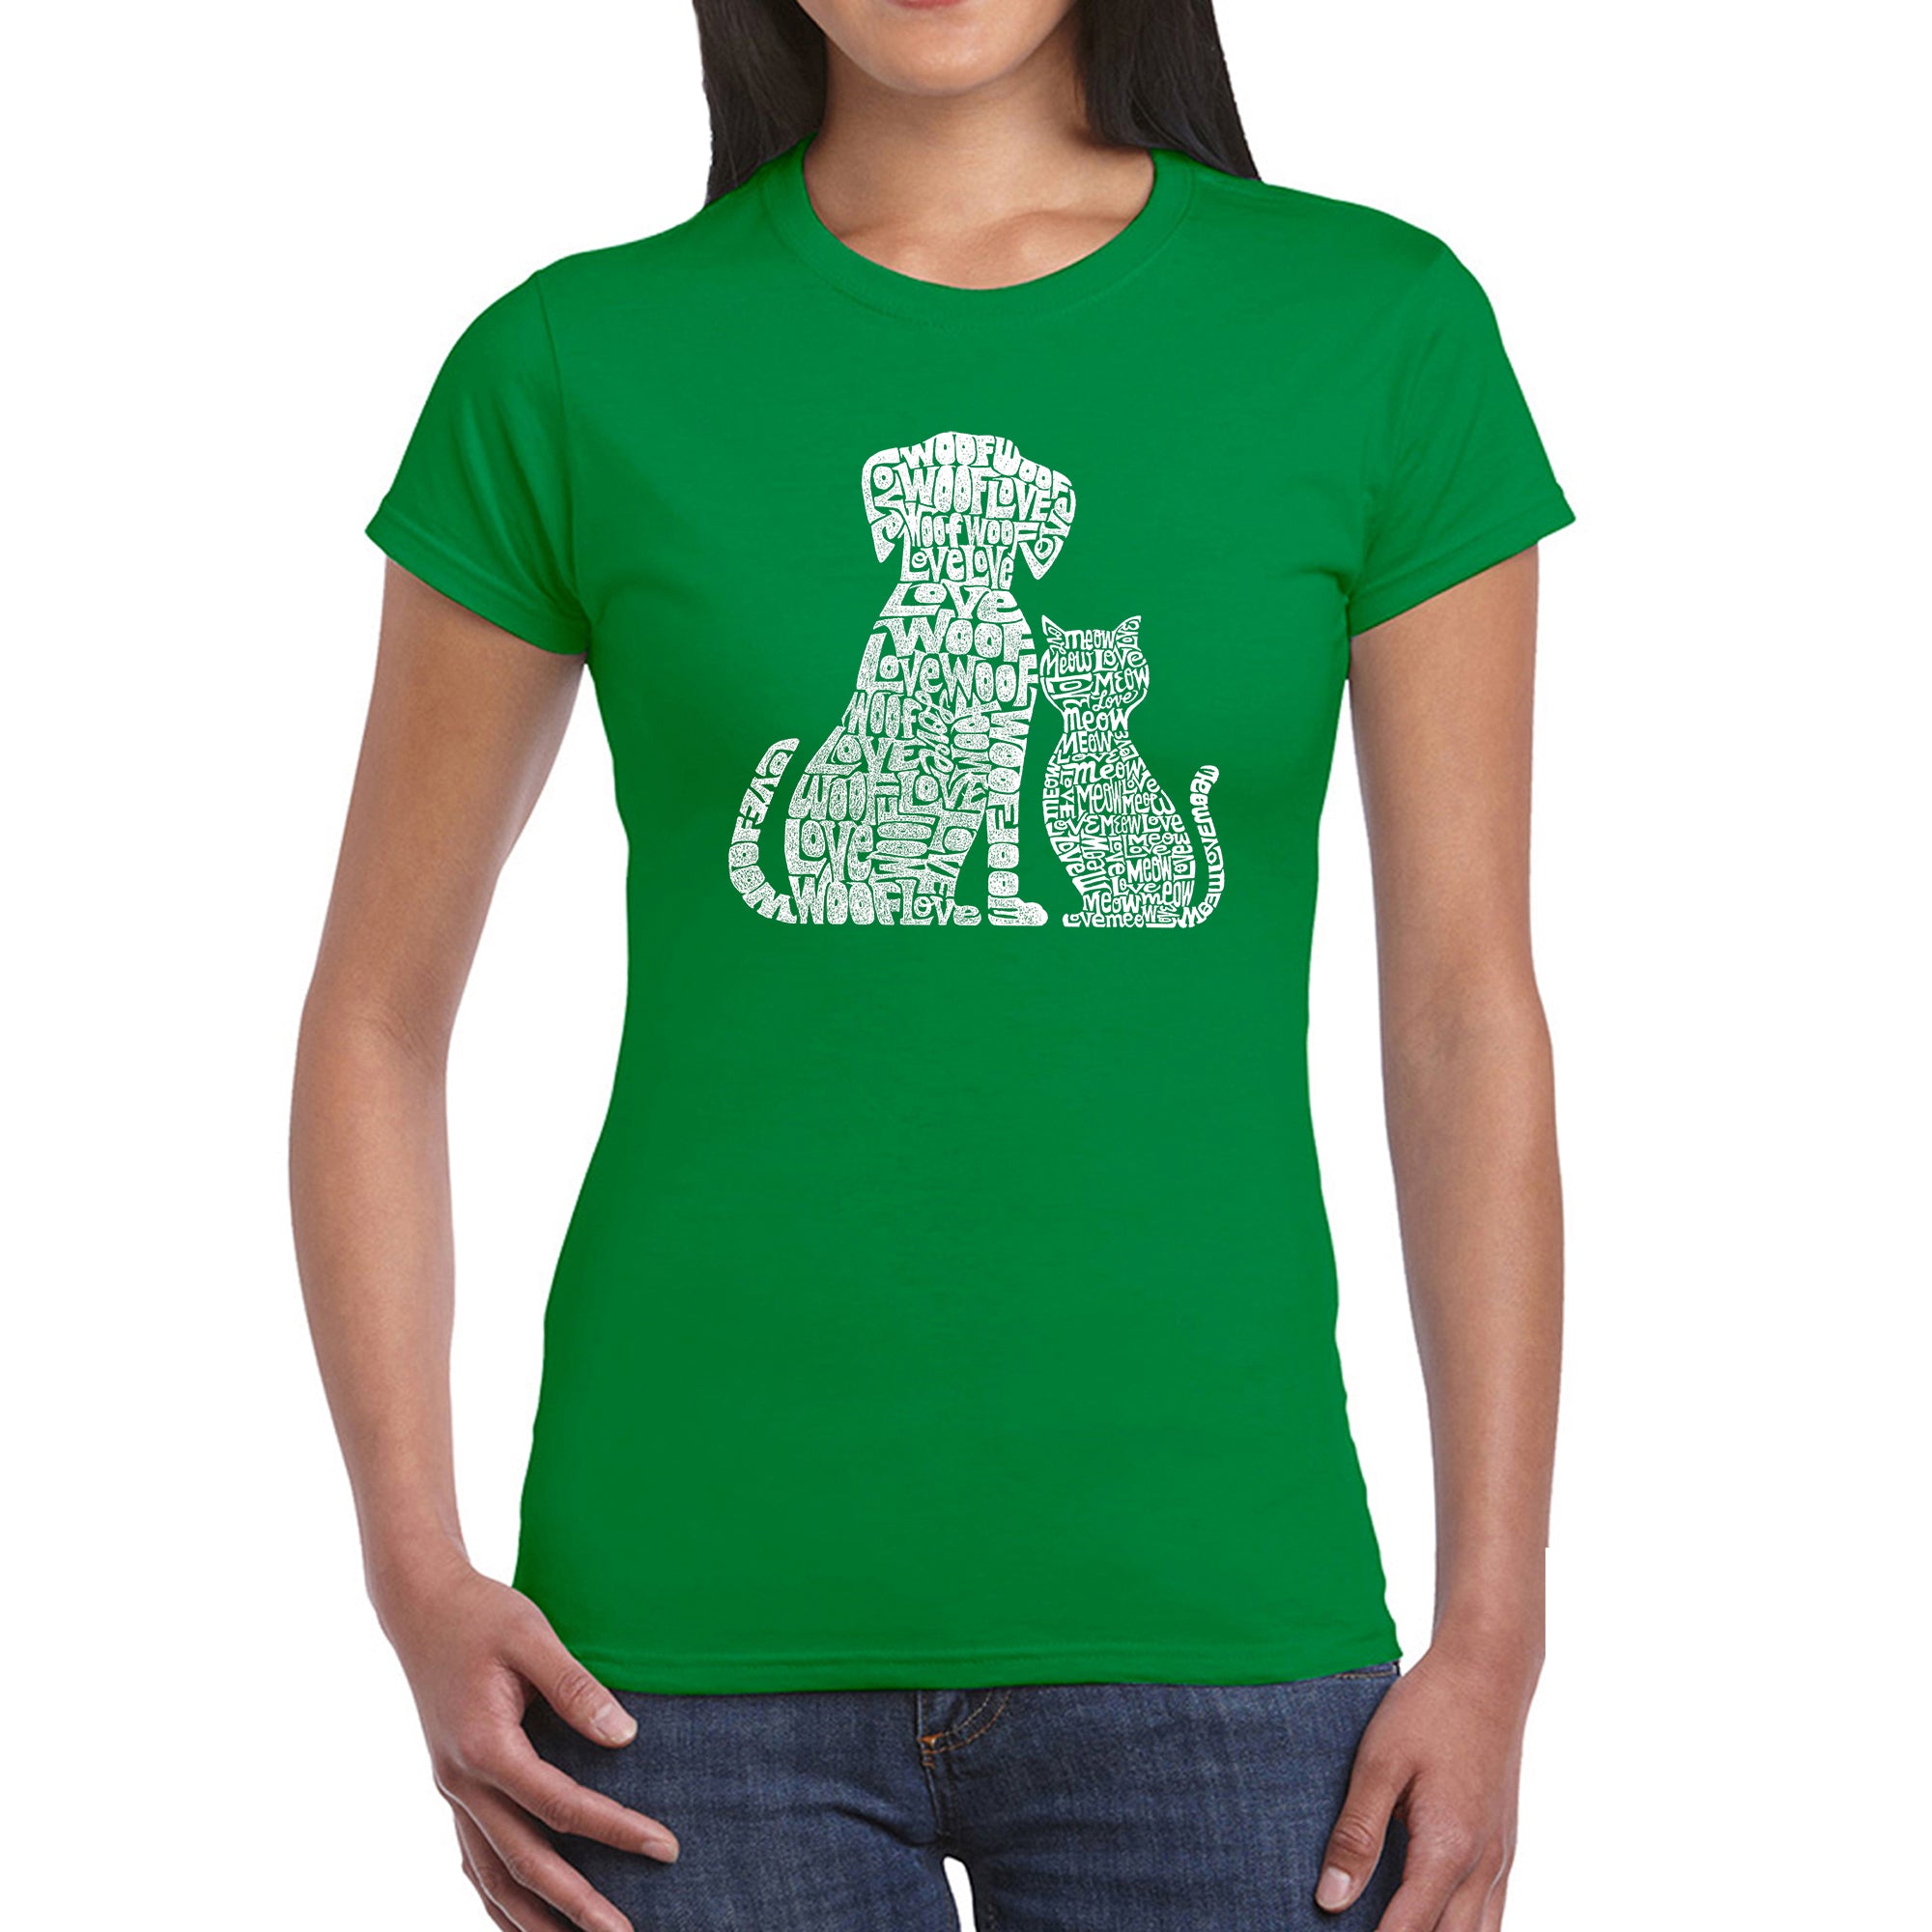 Dogs And Cats - Women's Word Art T-Shirt - Kelly - Small